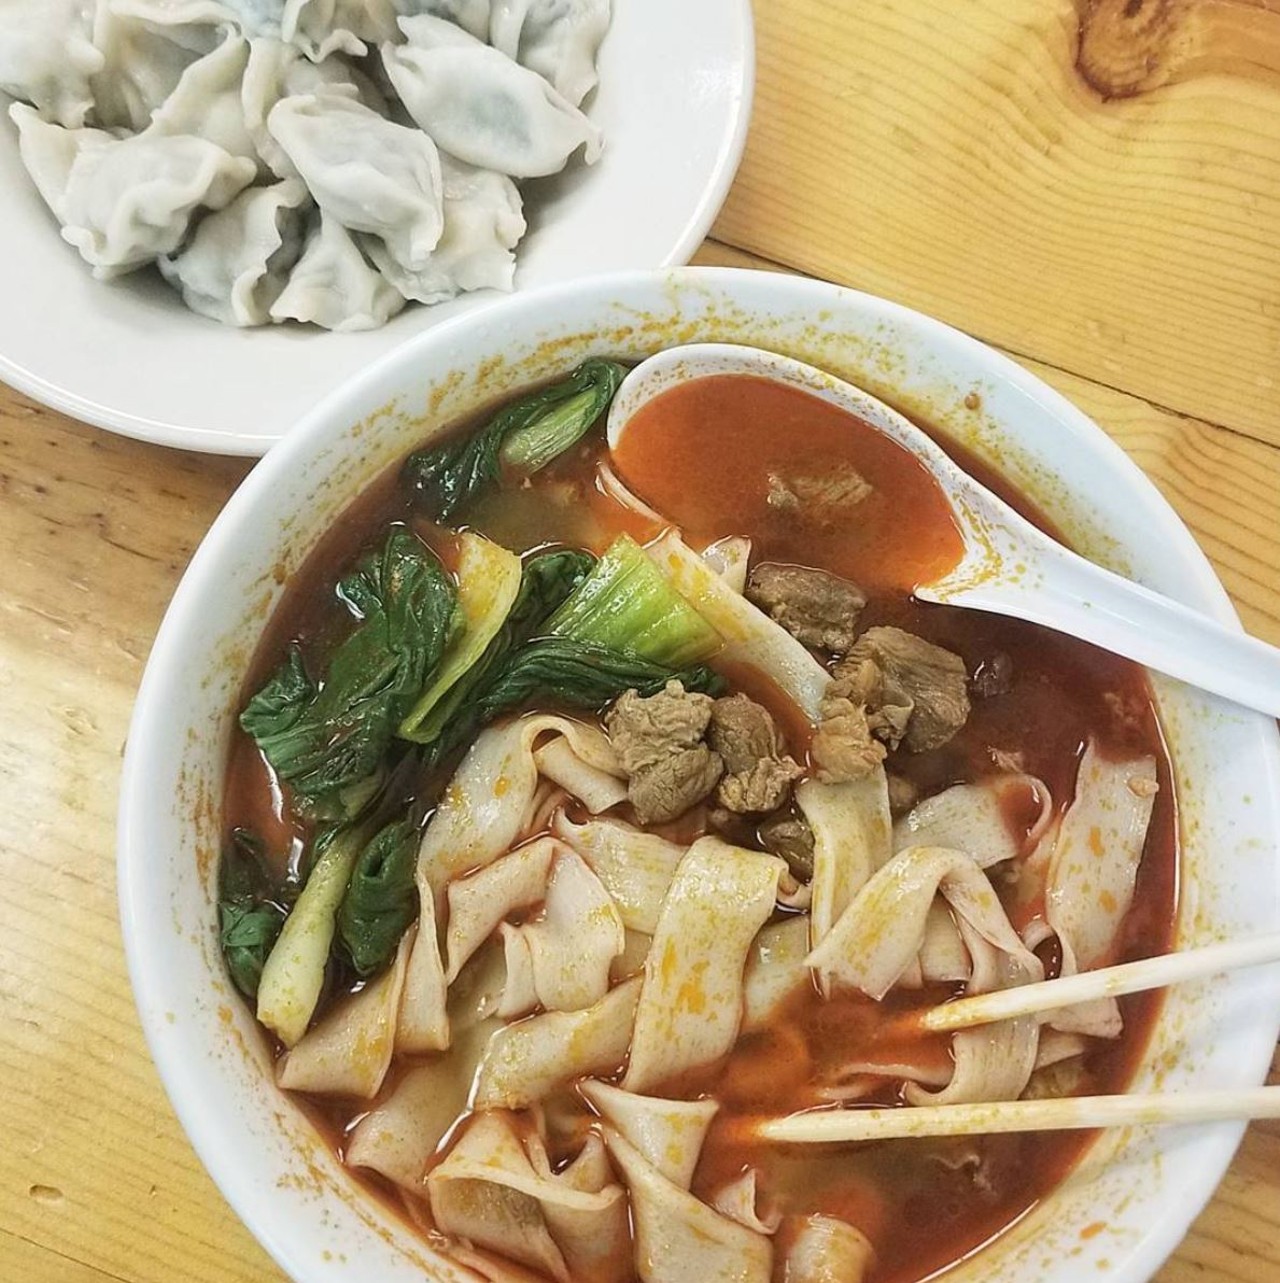 Kung Fu Noodle
6733 Bandera Rd, (210) 451-5586, facebook.com/pages/Kung-Fu-Noodle
You’d better believe that the noodles are hand-pulled at Kung Fu Noodle.
Photo via Instagram / mrsmaves